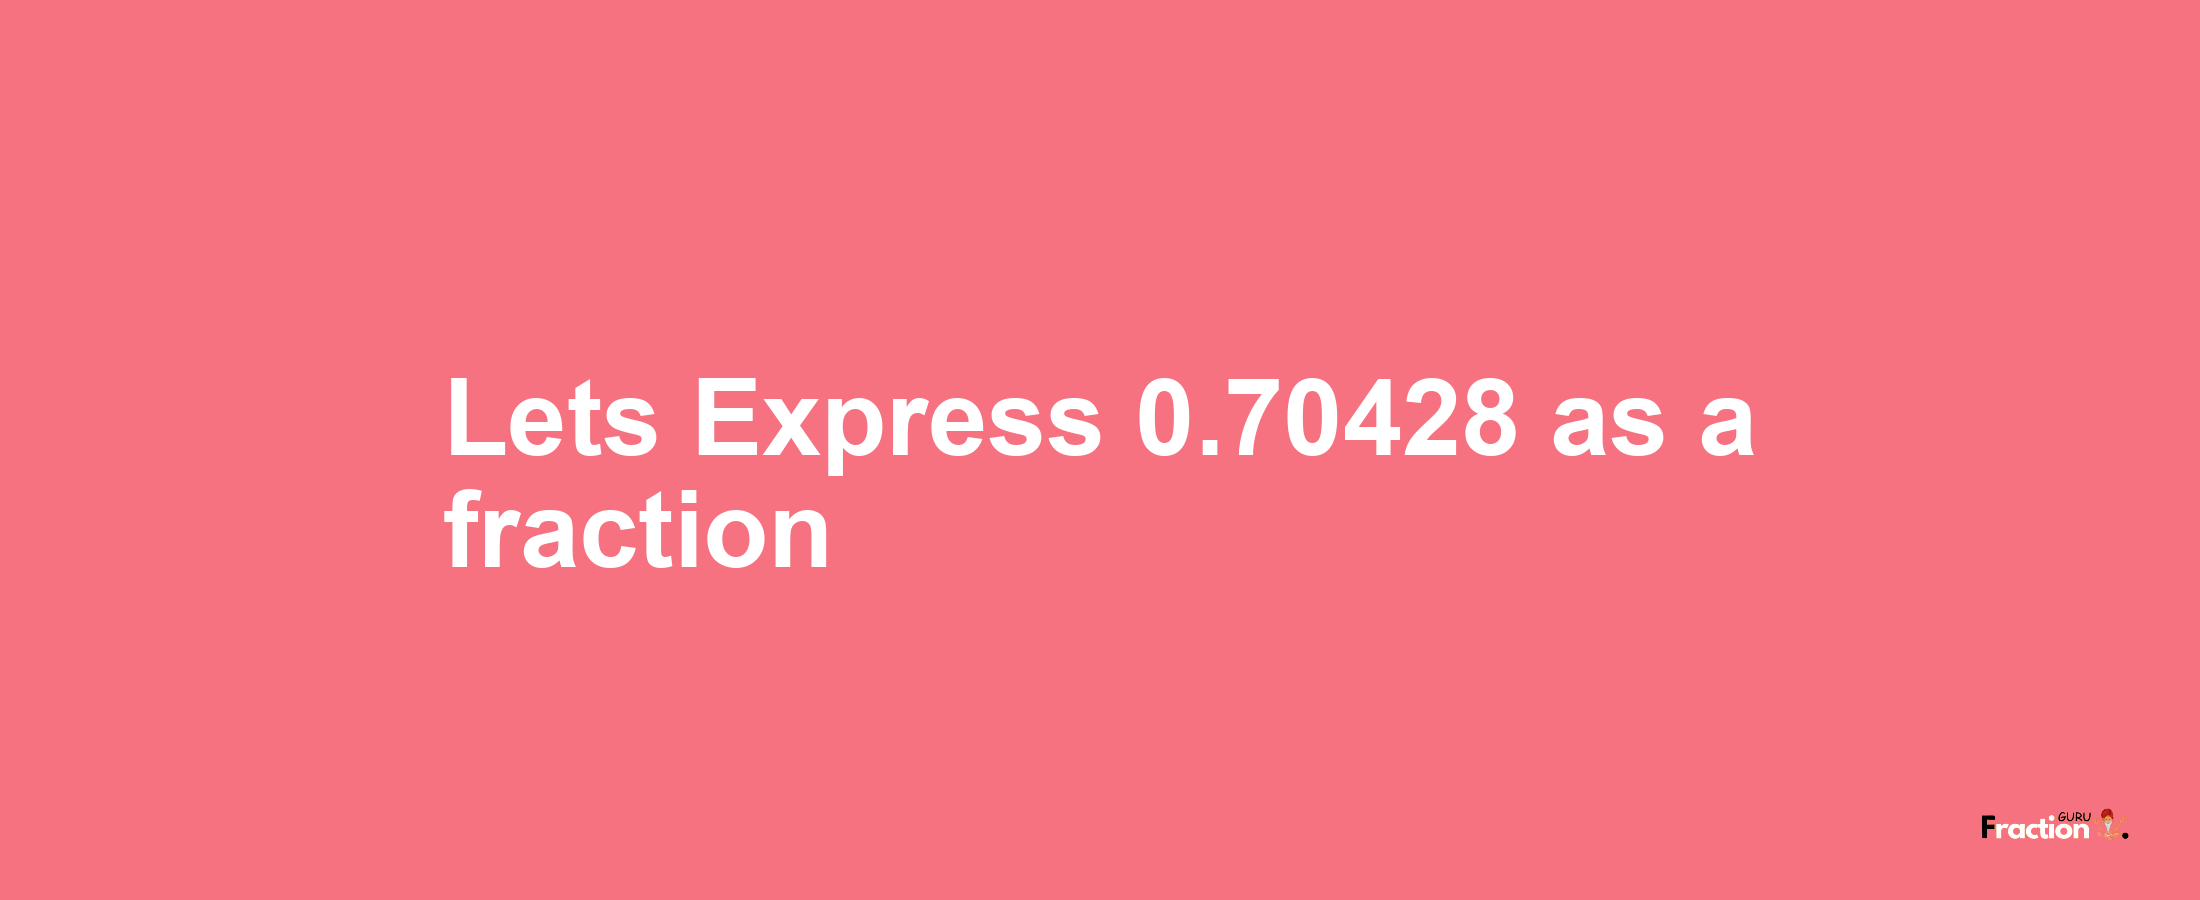 Lets Express 0.70428 as afraction